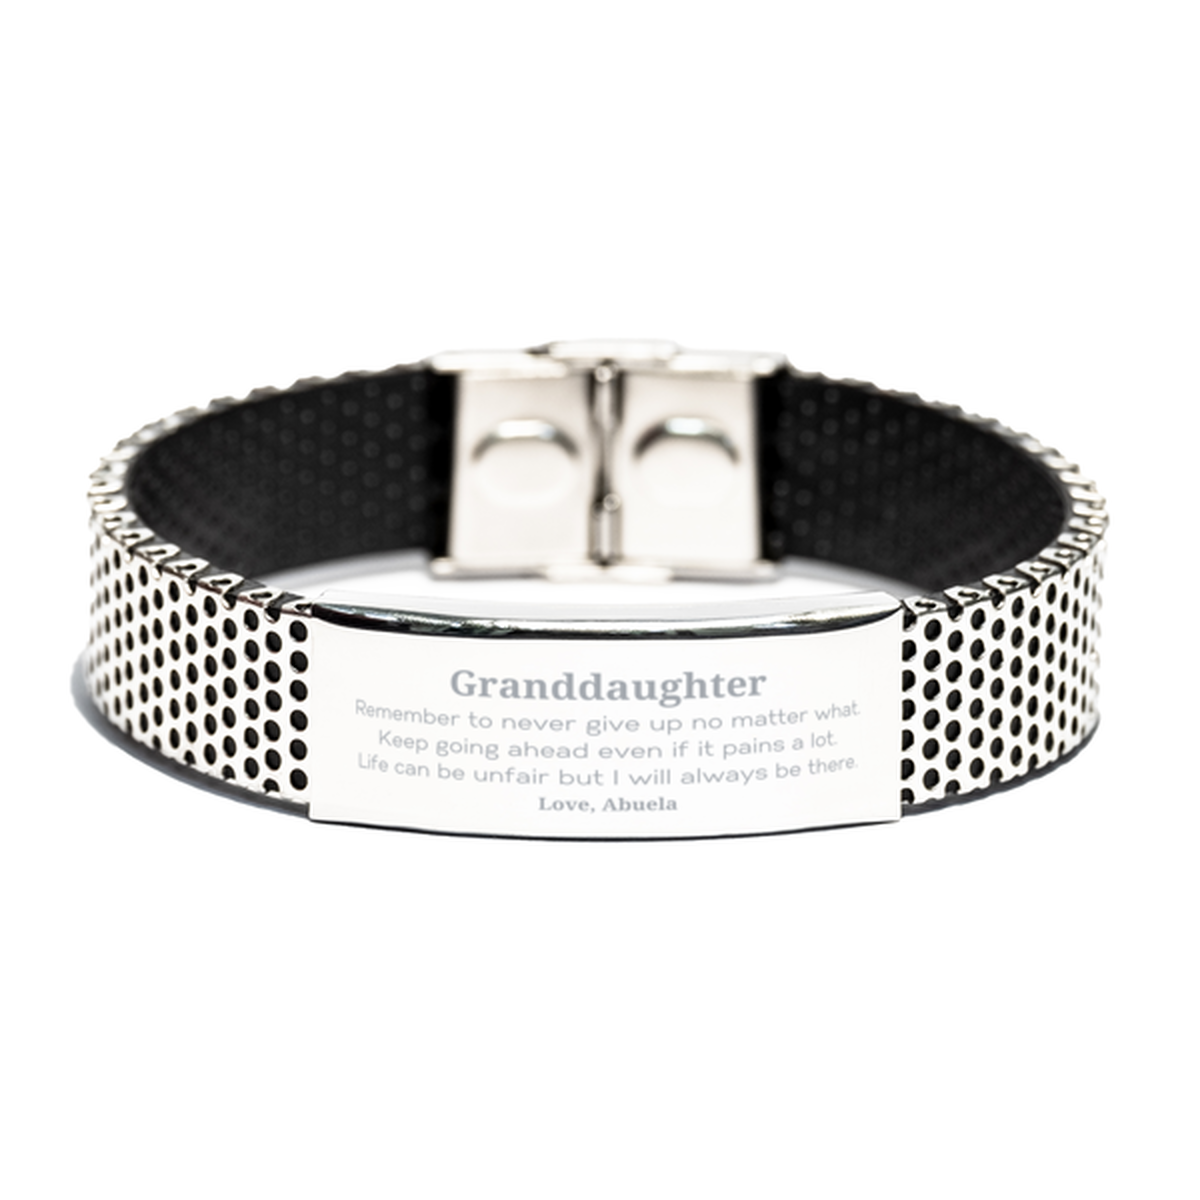 Granddaughter Motivational Gifts from Abuela, Remember to never give up no matter what, Inspirational Birthday Stainless Steel Bracelet for Granddaughter